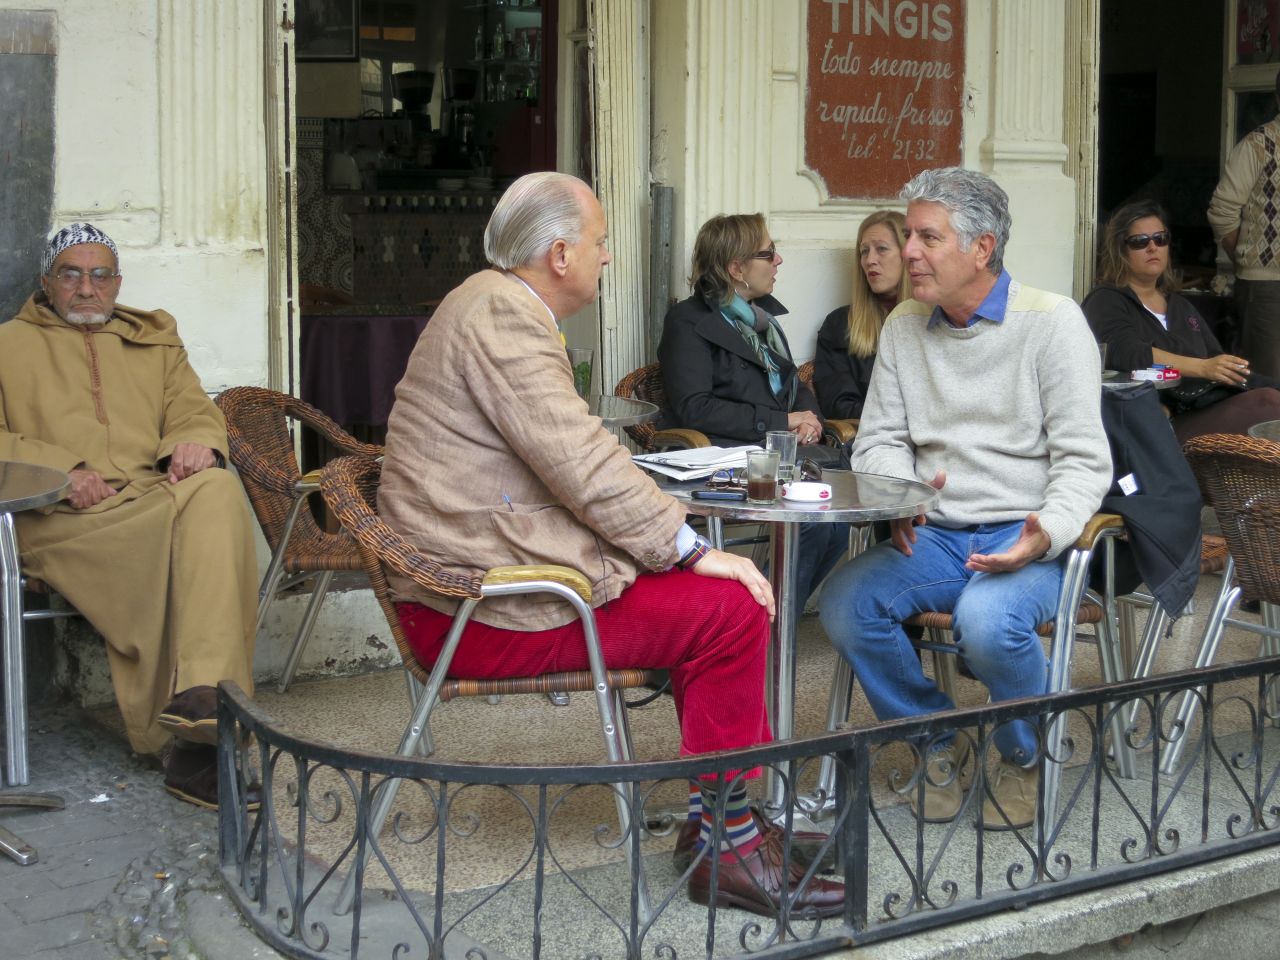 Anthony Bourdain, right, talks with British ex-pat Jonathan Dawson at Cafe Tingis in Tangier, Morocco.